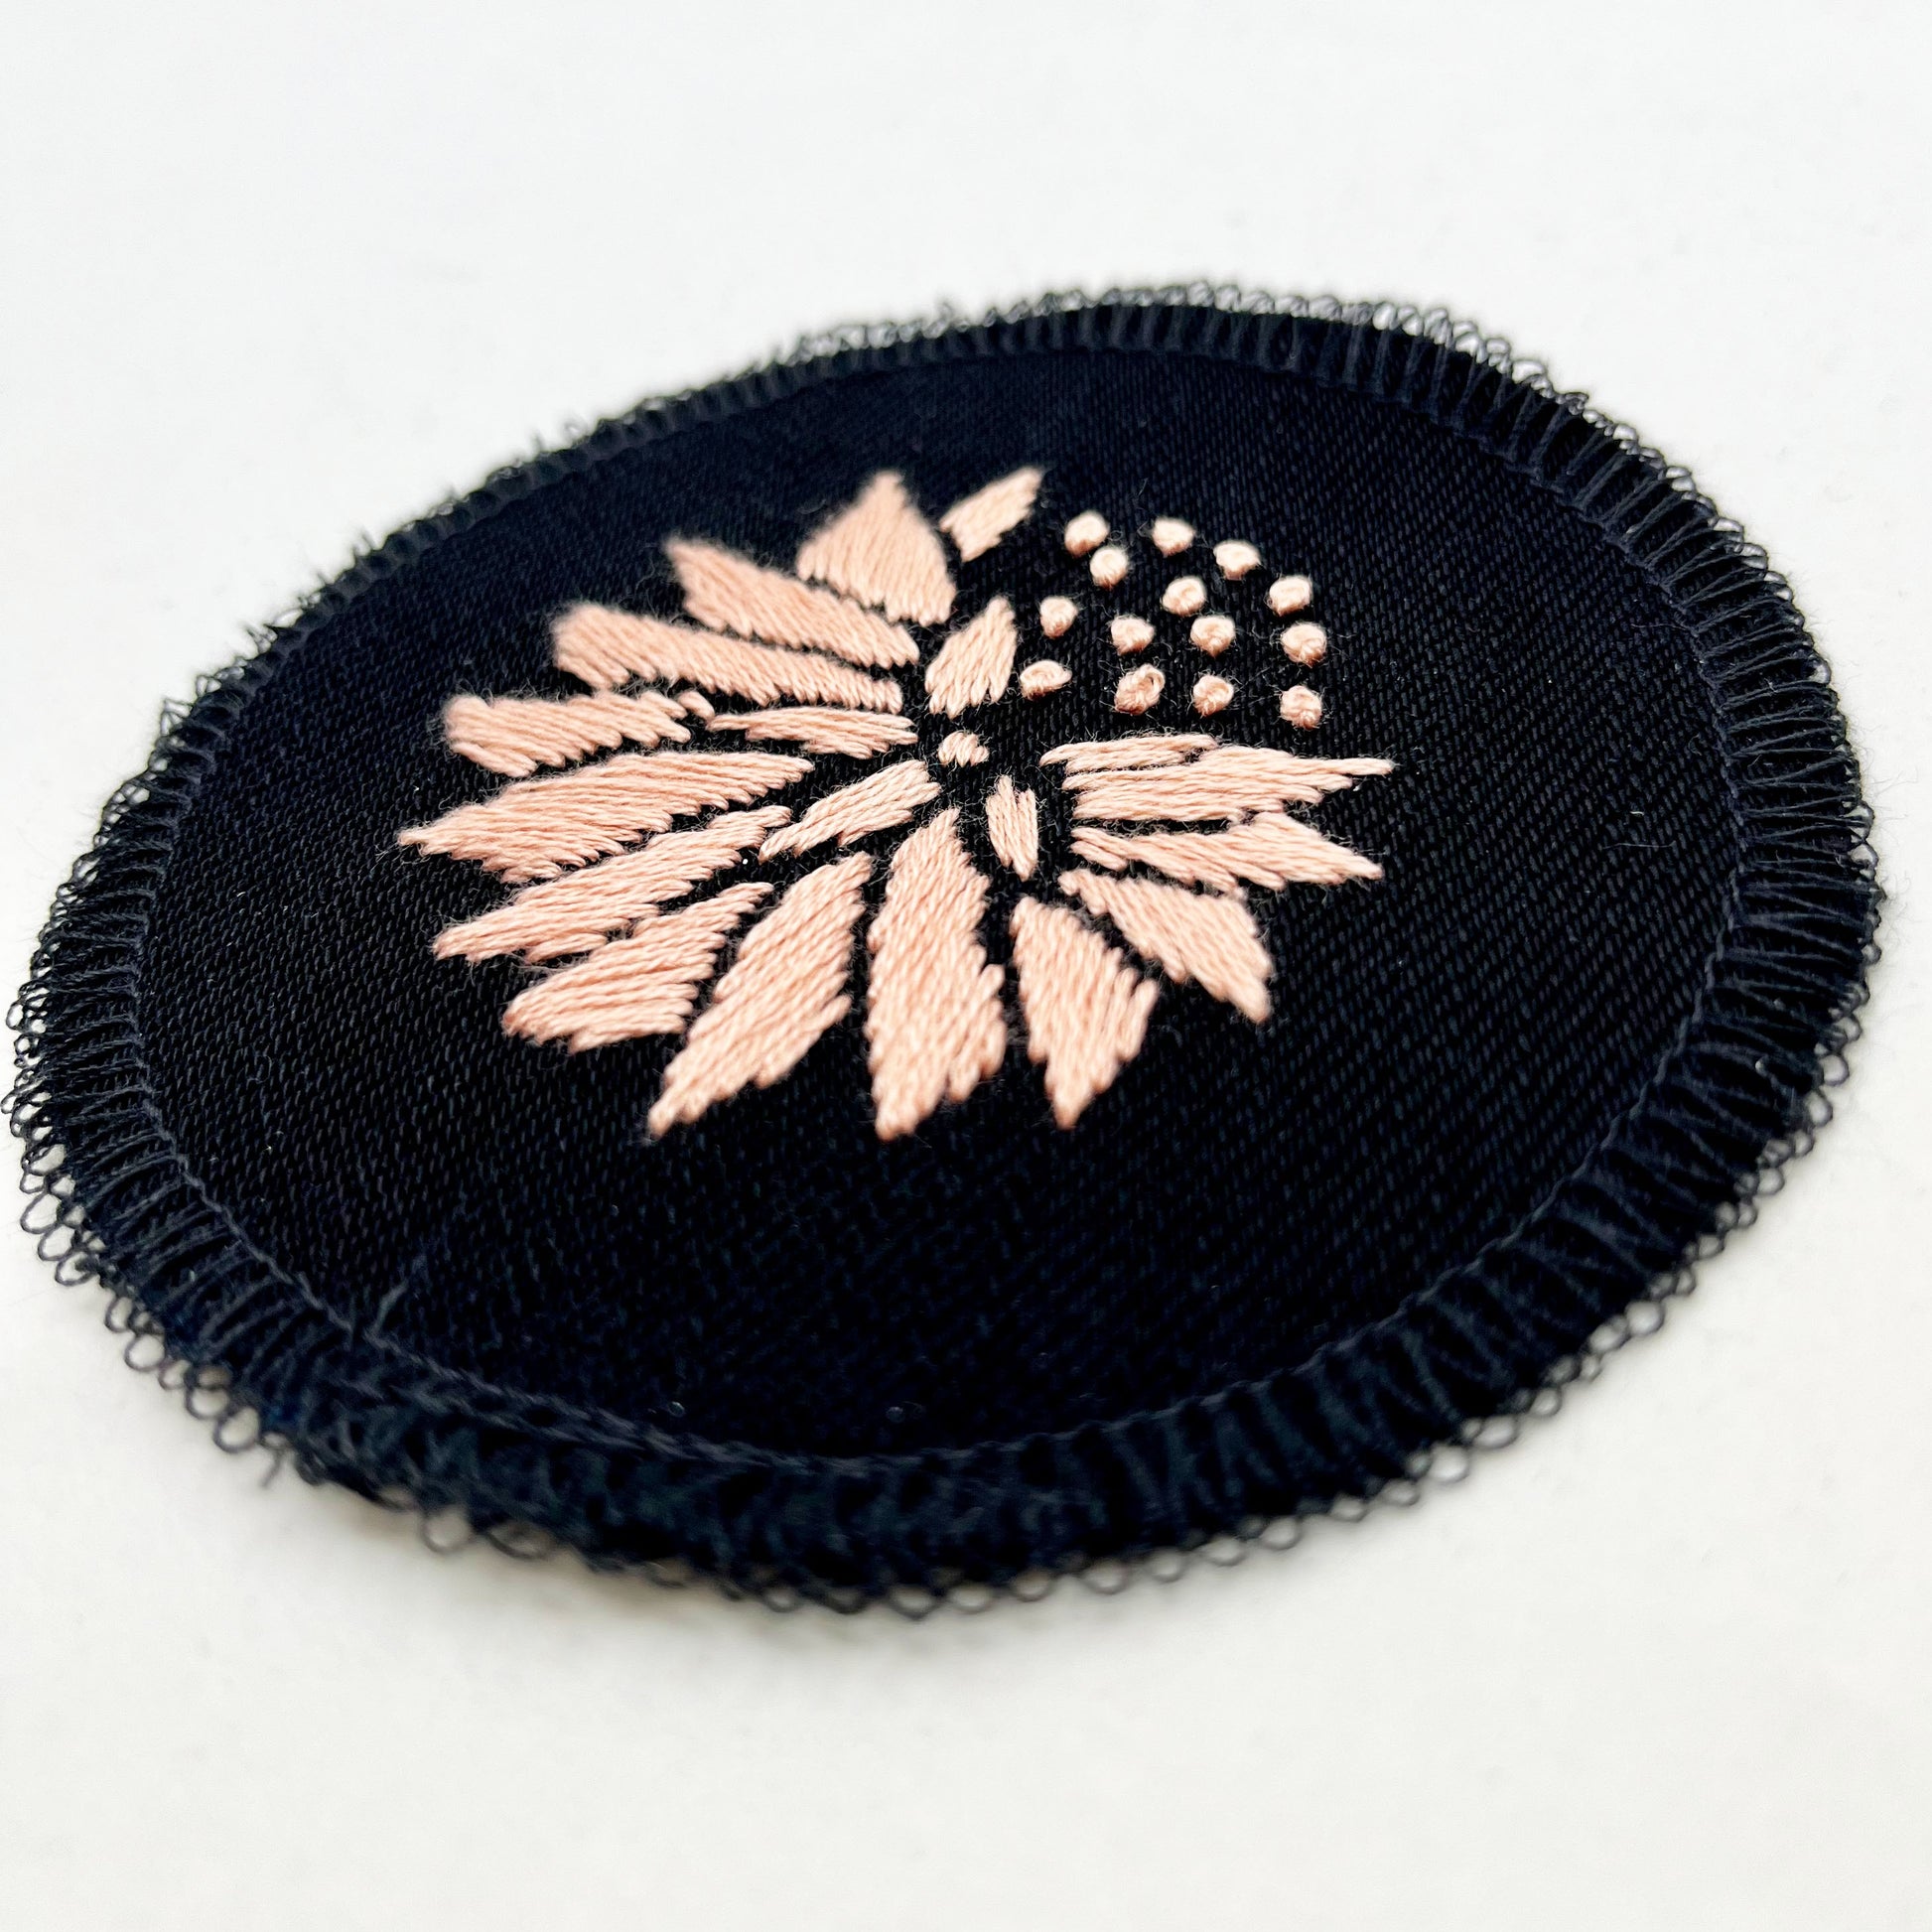 a circle shaped patch made out of black twill weave fabric, hand embroidered with an abstract dandelion in peach colored floss, with solid filled petals, edges overlocked in black, on a white background